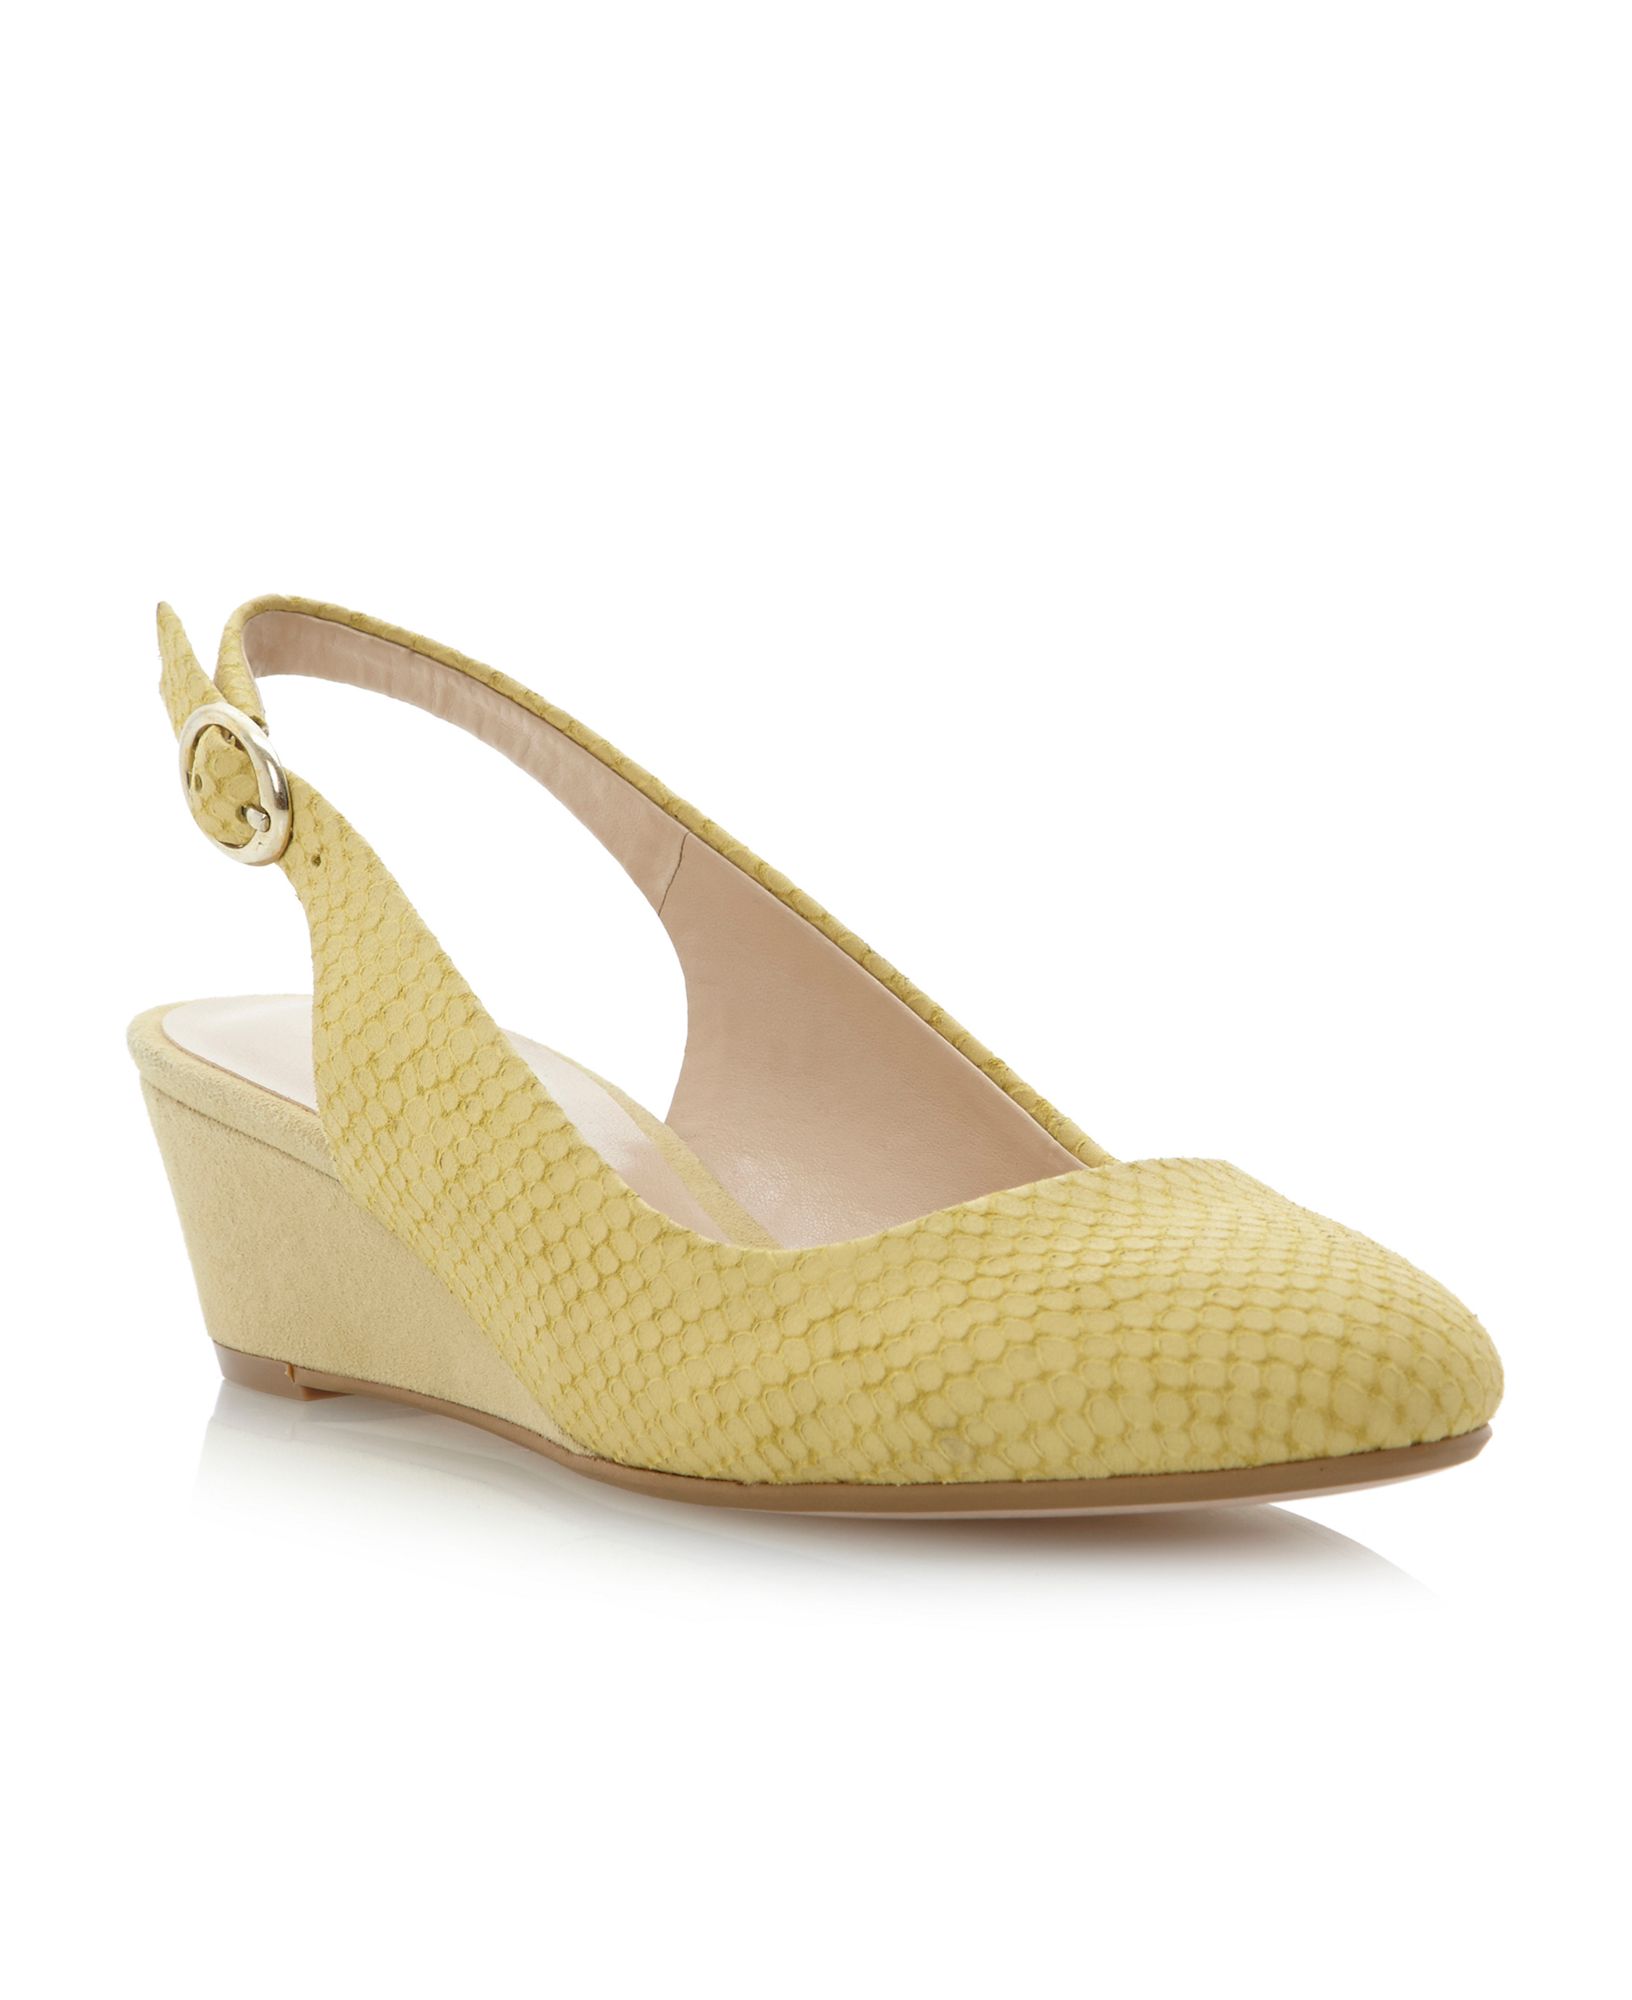 Dune Consort Sling Back Wedge Court Shoes in Yellow | Lyst